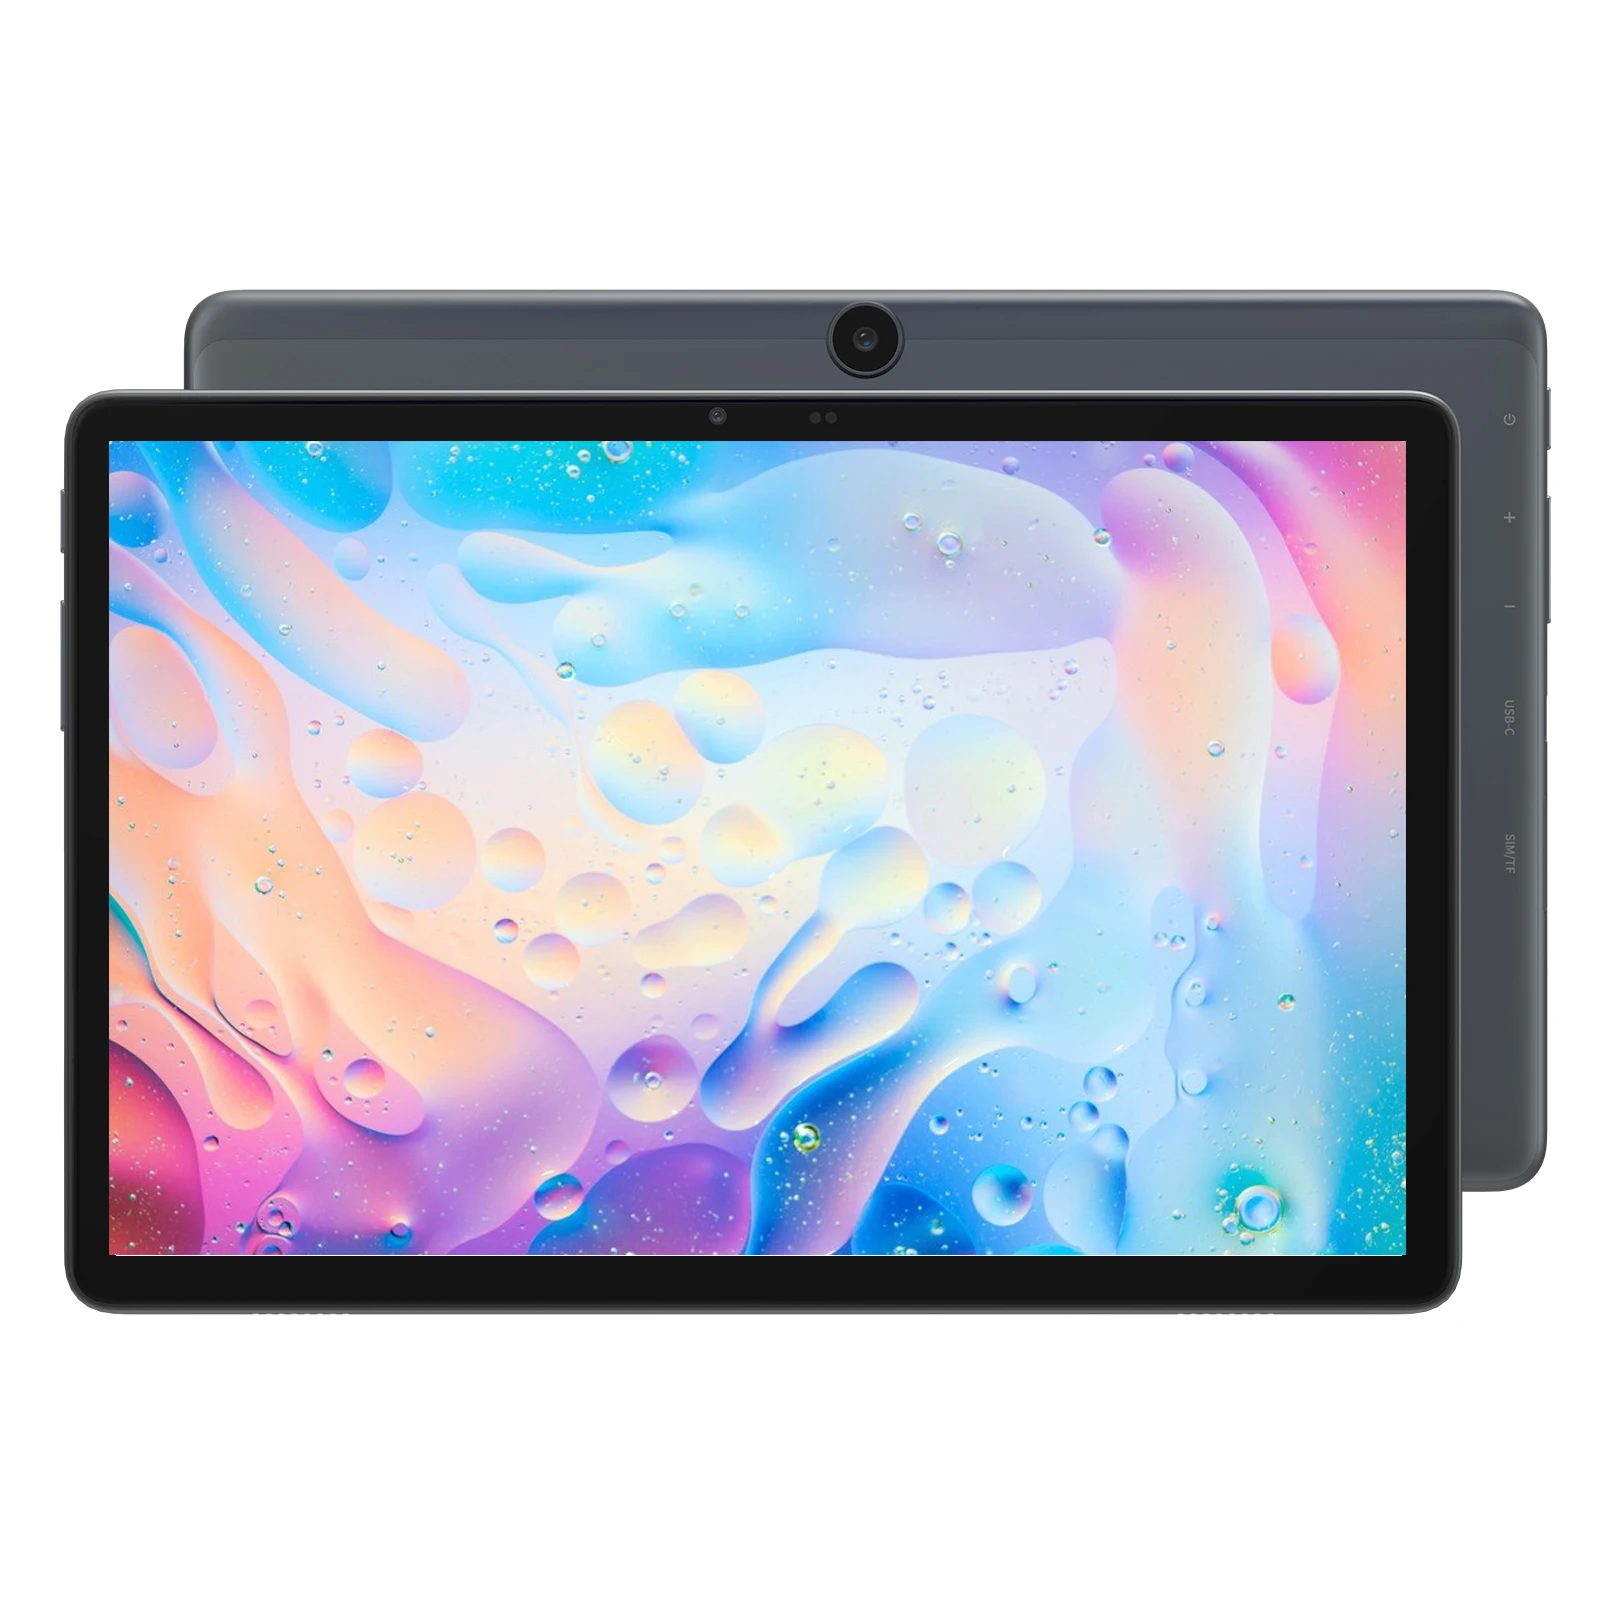 

Alldocube Smile X Tablet 10 inch 1920x1200 IPS Unisoc T610 4GB RAM 64GB ROM Android 11 Tablet PC 4G LTE Phone Call